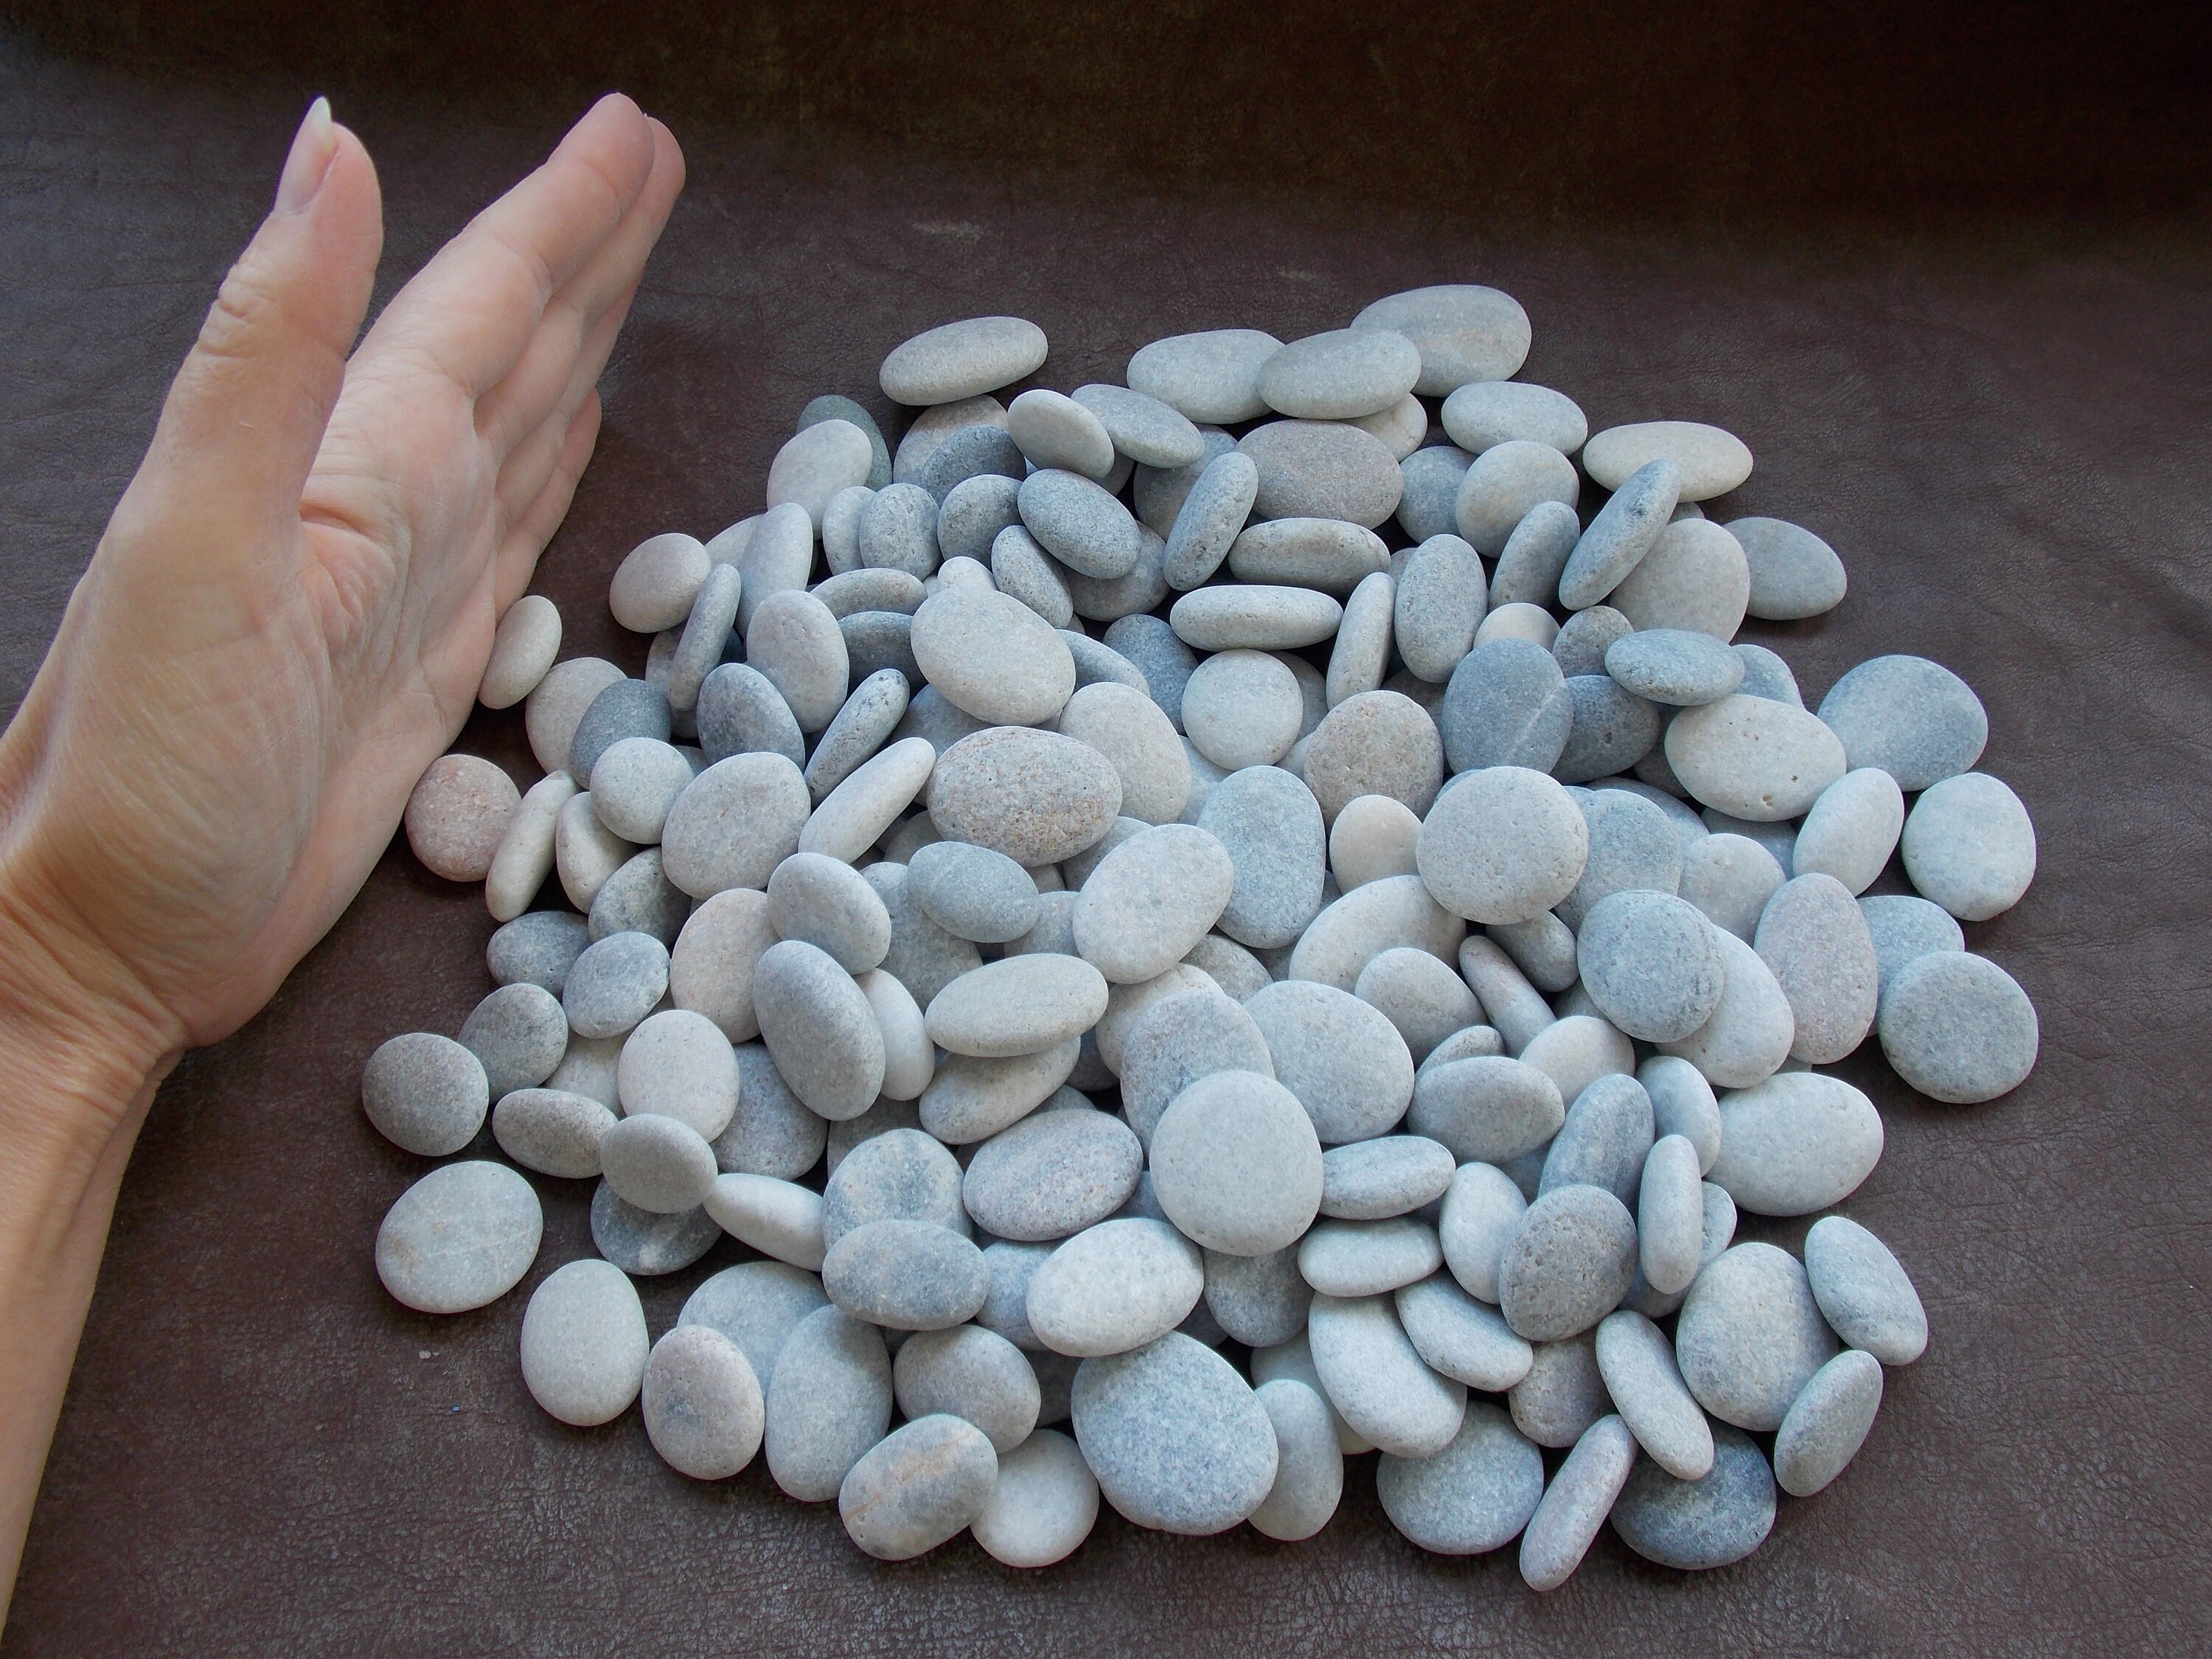 150 Small Oval and Round Mediterranean Sea Stones for Pebble Art Ultra Flat  Surf Tumbled Rocks Smooth Beach Pebbles 1,5-3,5cm, 0,61,4 